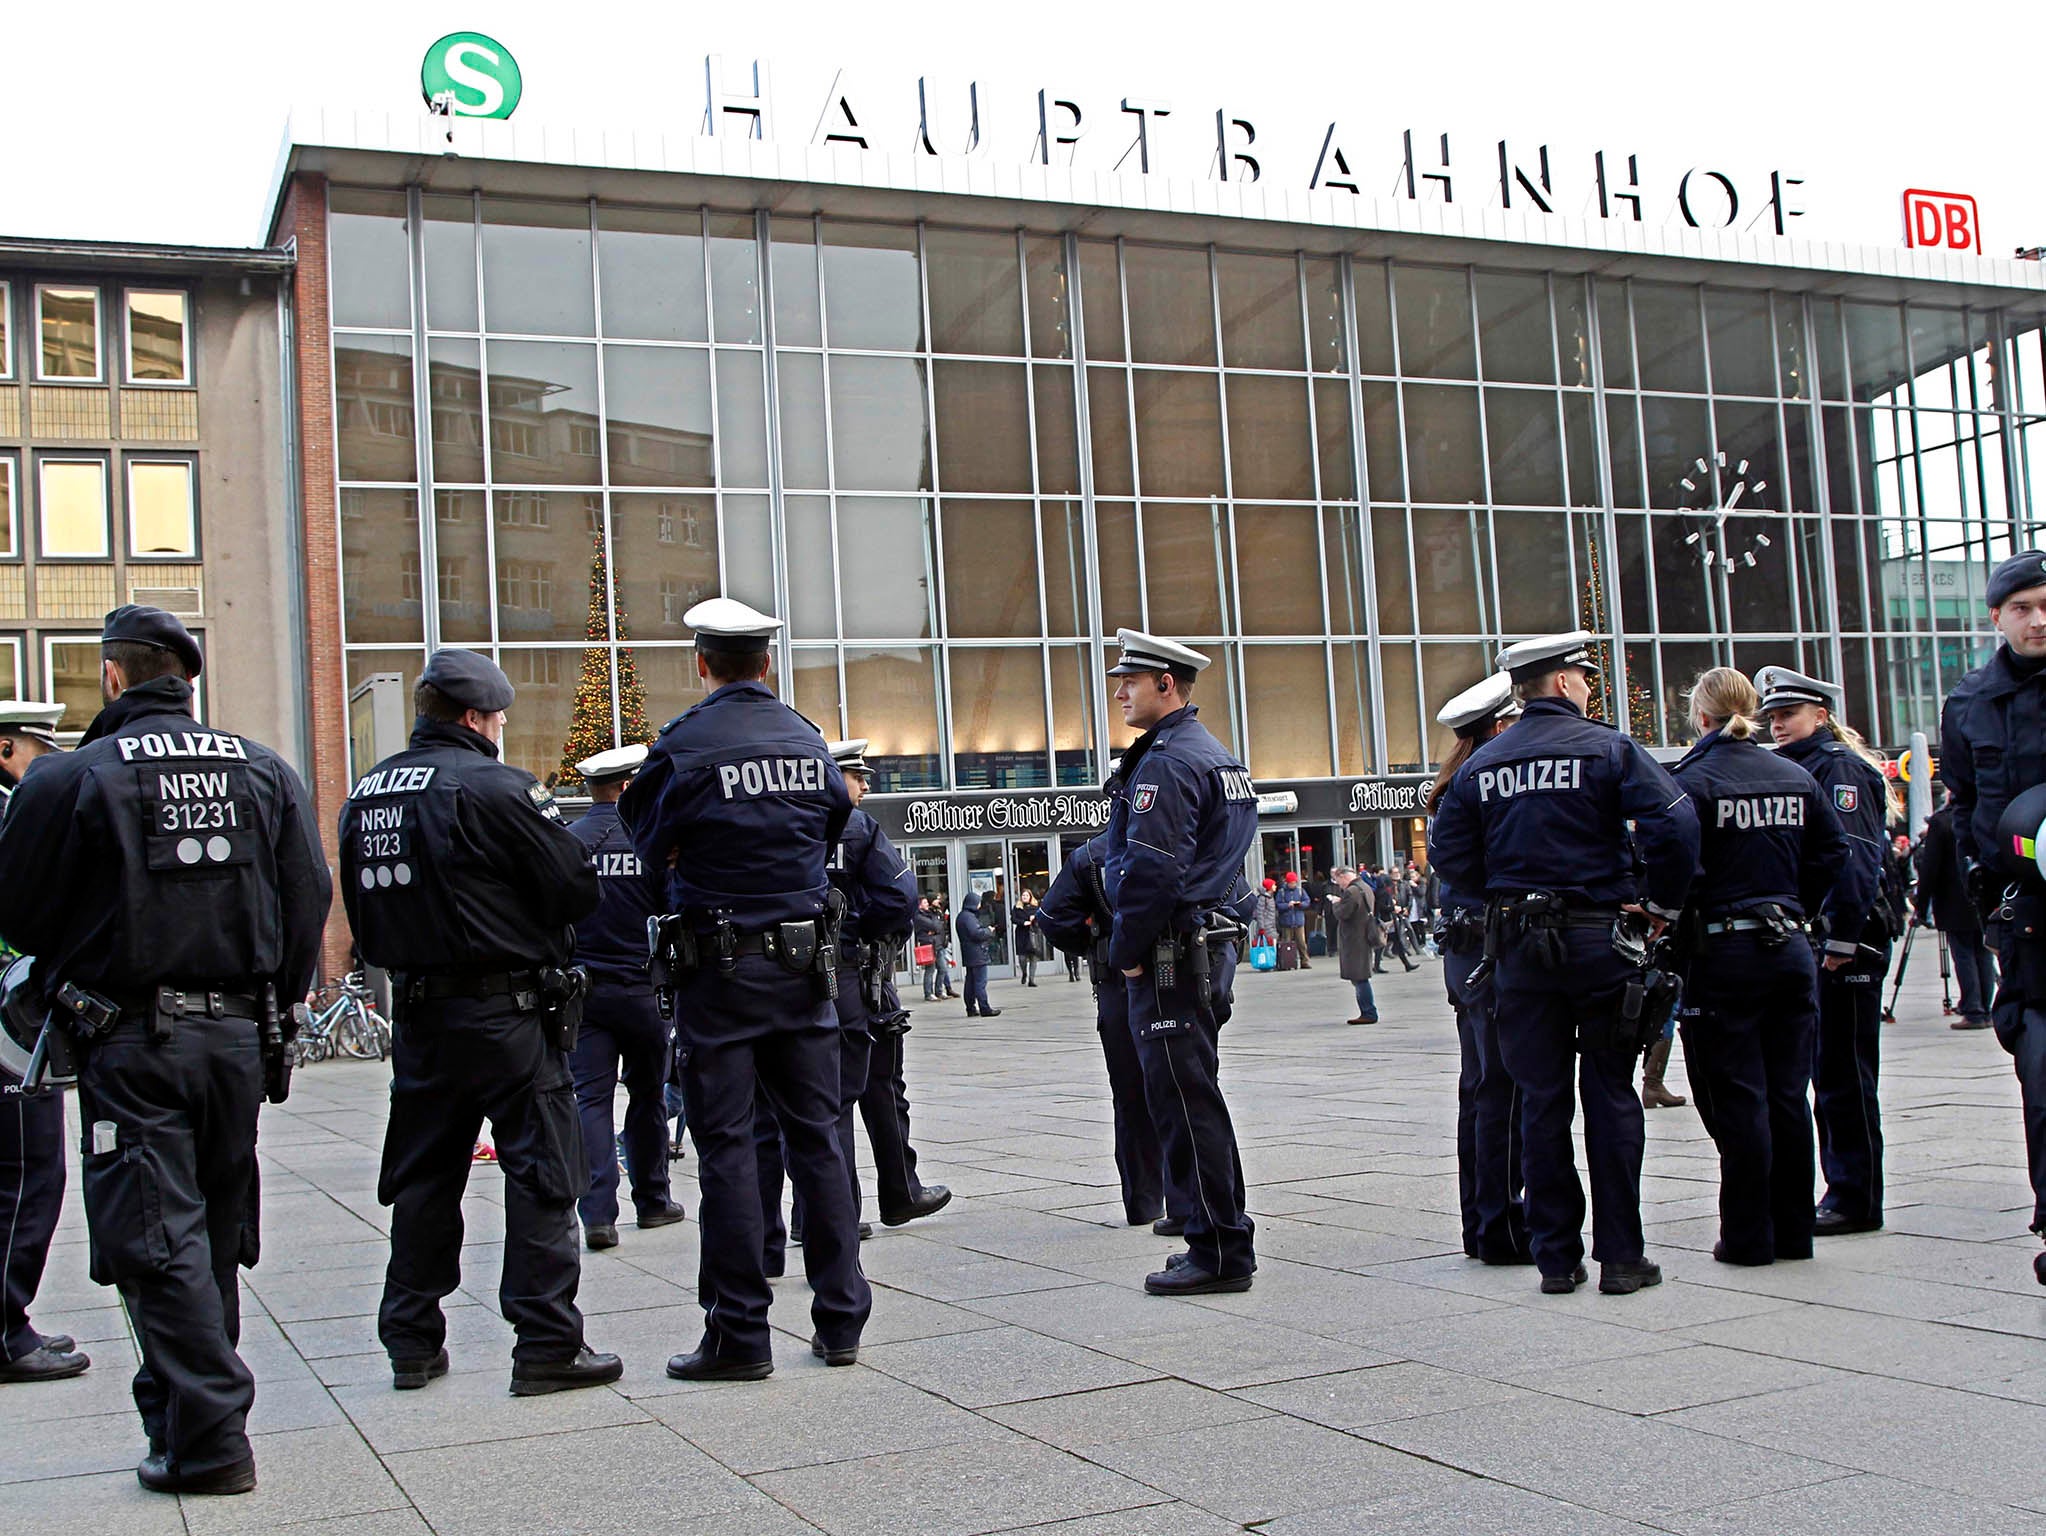 The pair are understood to have been detained overnight while near Cologne's central station – an area where many of the New Year's Eve assaults took place